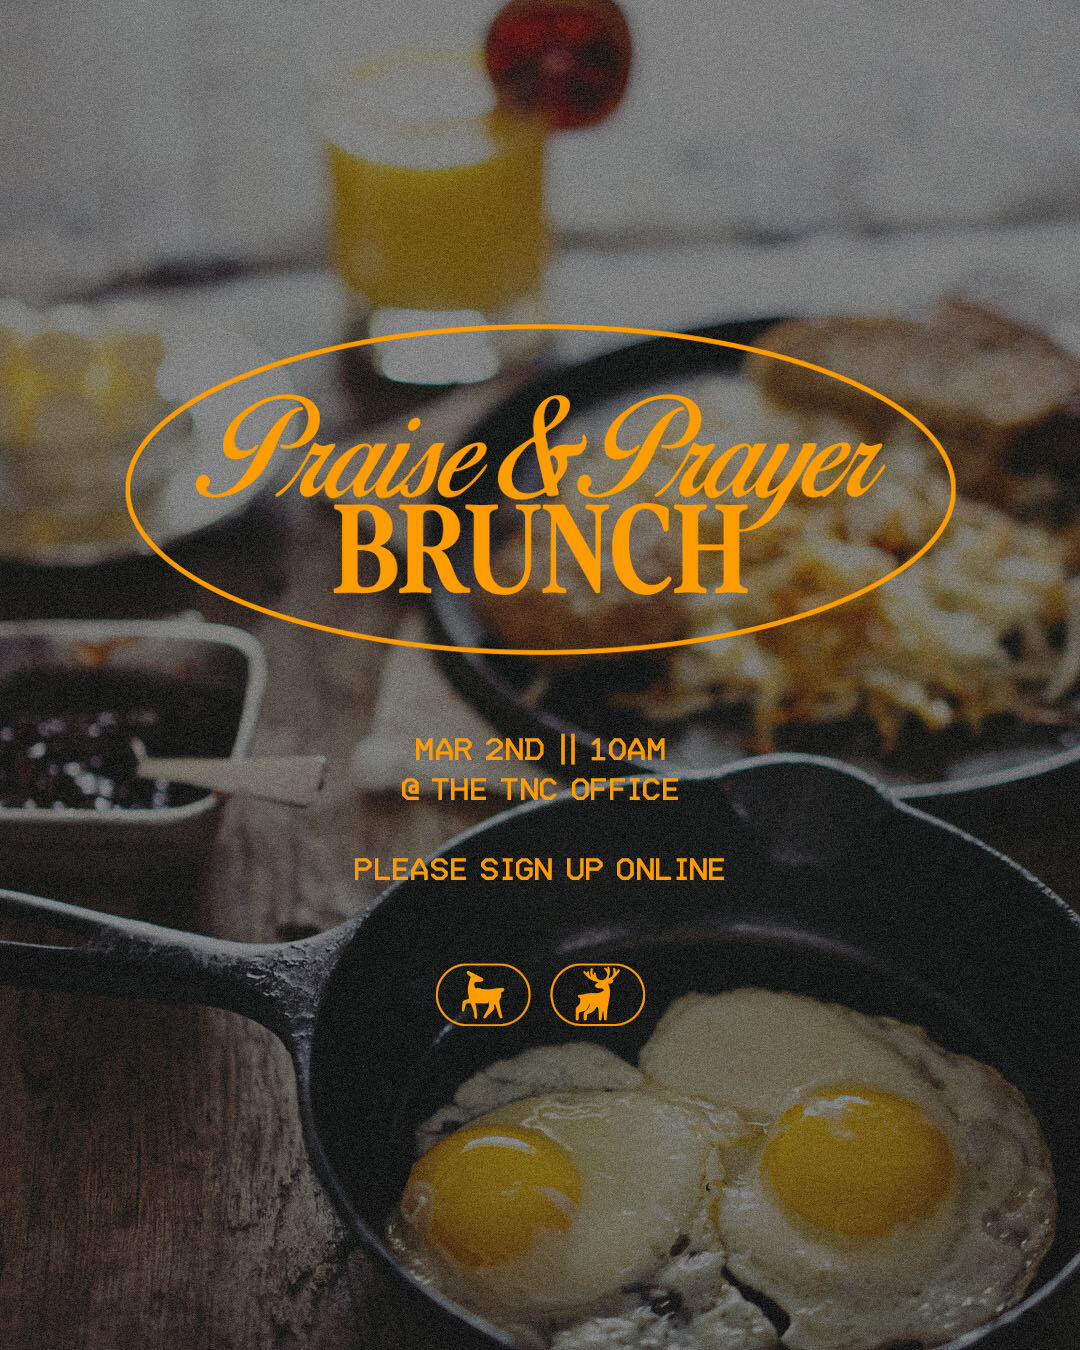 Hey church! This week's announcements:

- Our monthly Praise &amp; Prayer Brunch will be on Saturday, 3/2! This will be a time for personal and corporate prayer, worship, and small group discussions. Light brunch and coffee provided, all children are